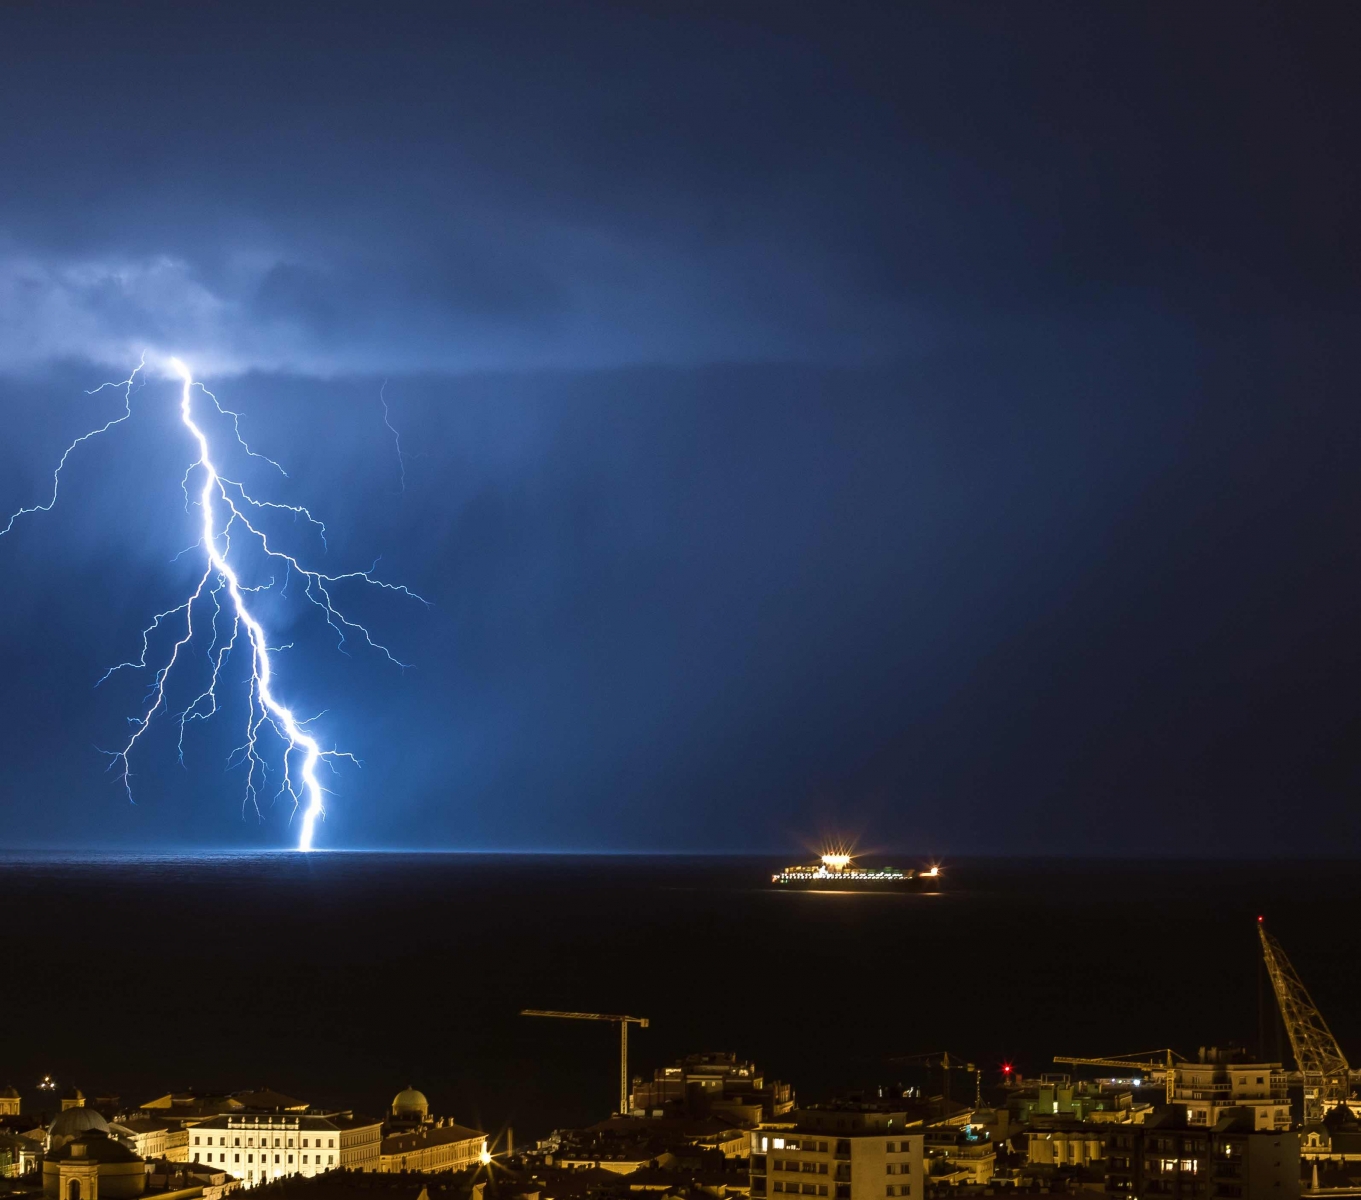 Massive cloud to ground lightning bolts hitting the horizon of the Trieste city lights